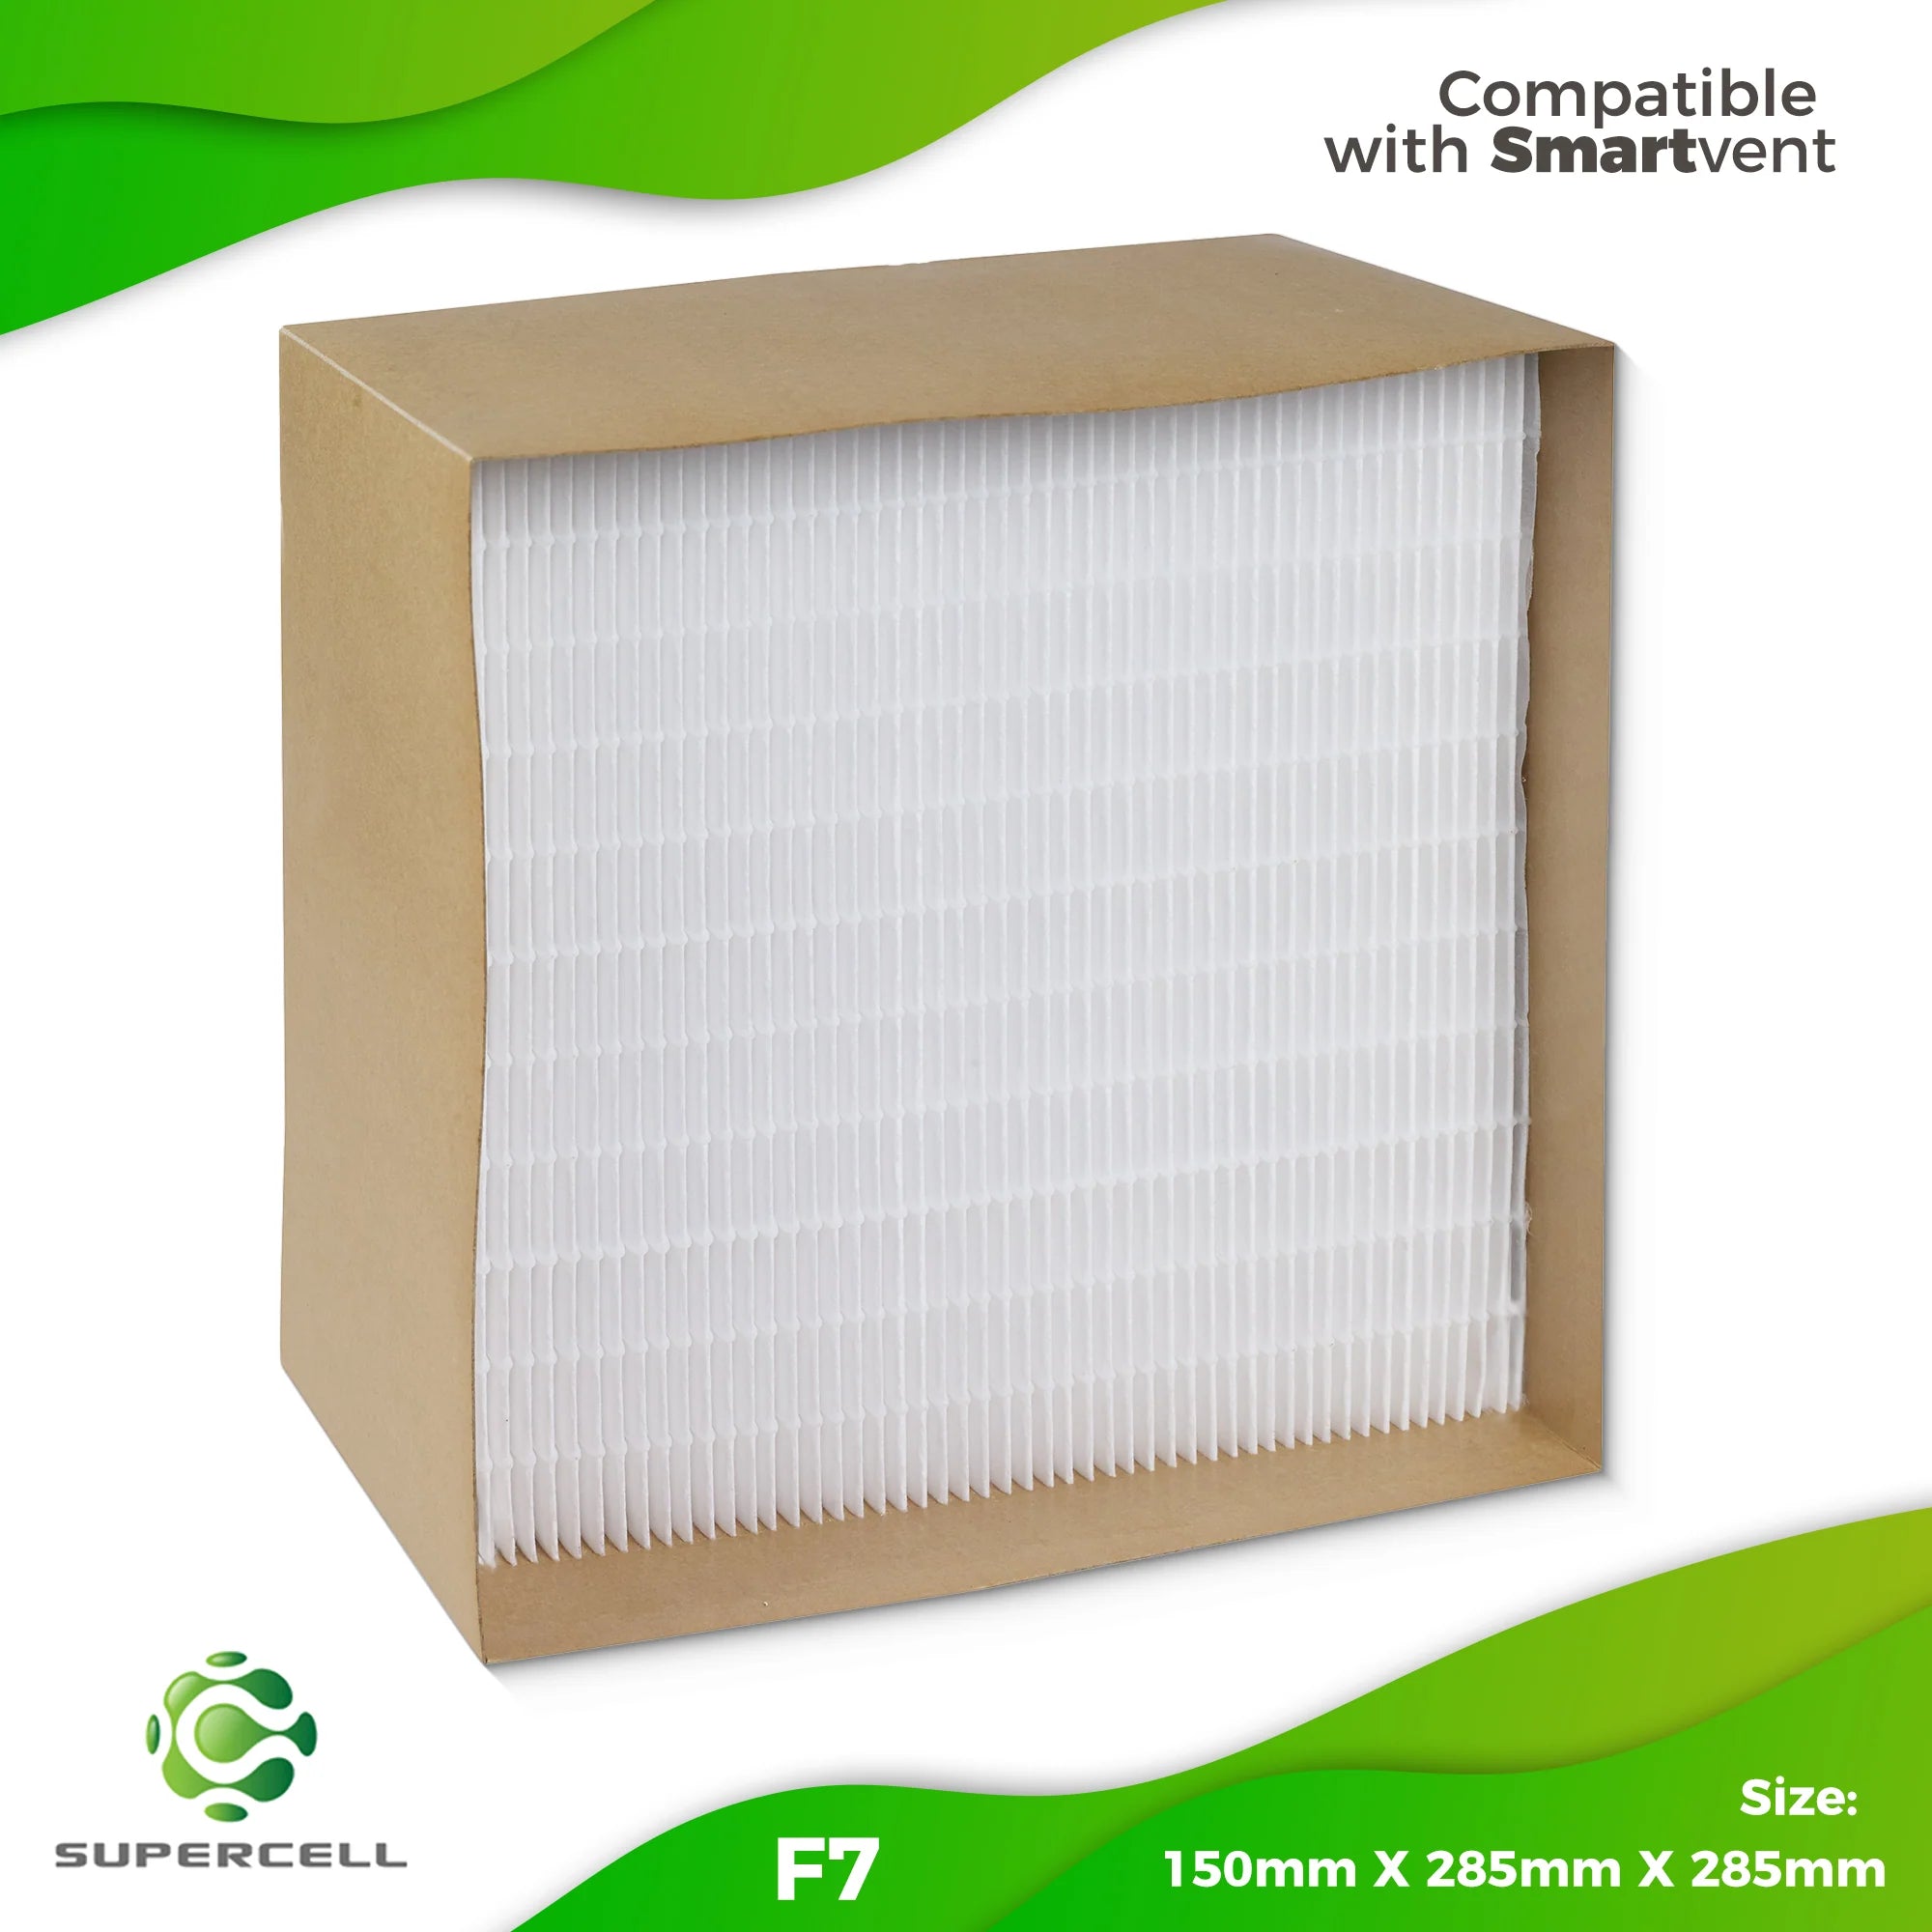 Best selling Smartvent filter in NZ $60 why pay $110